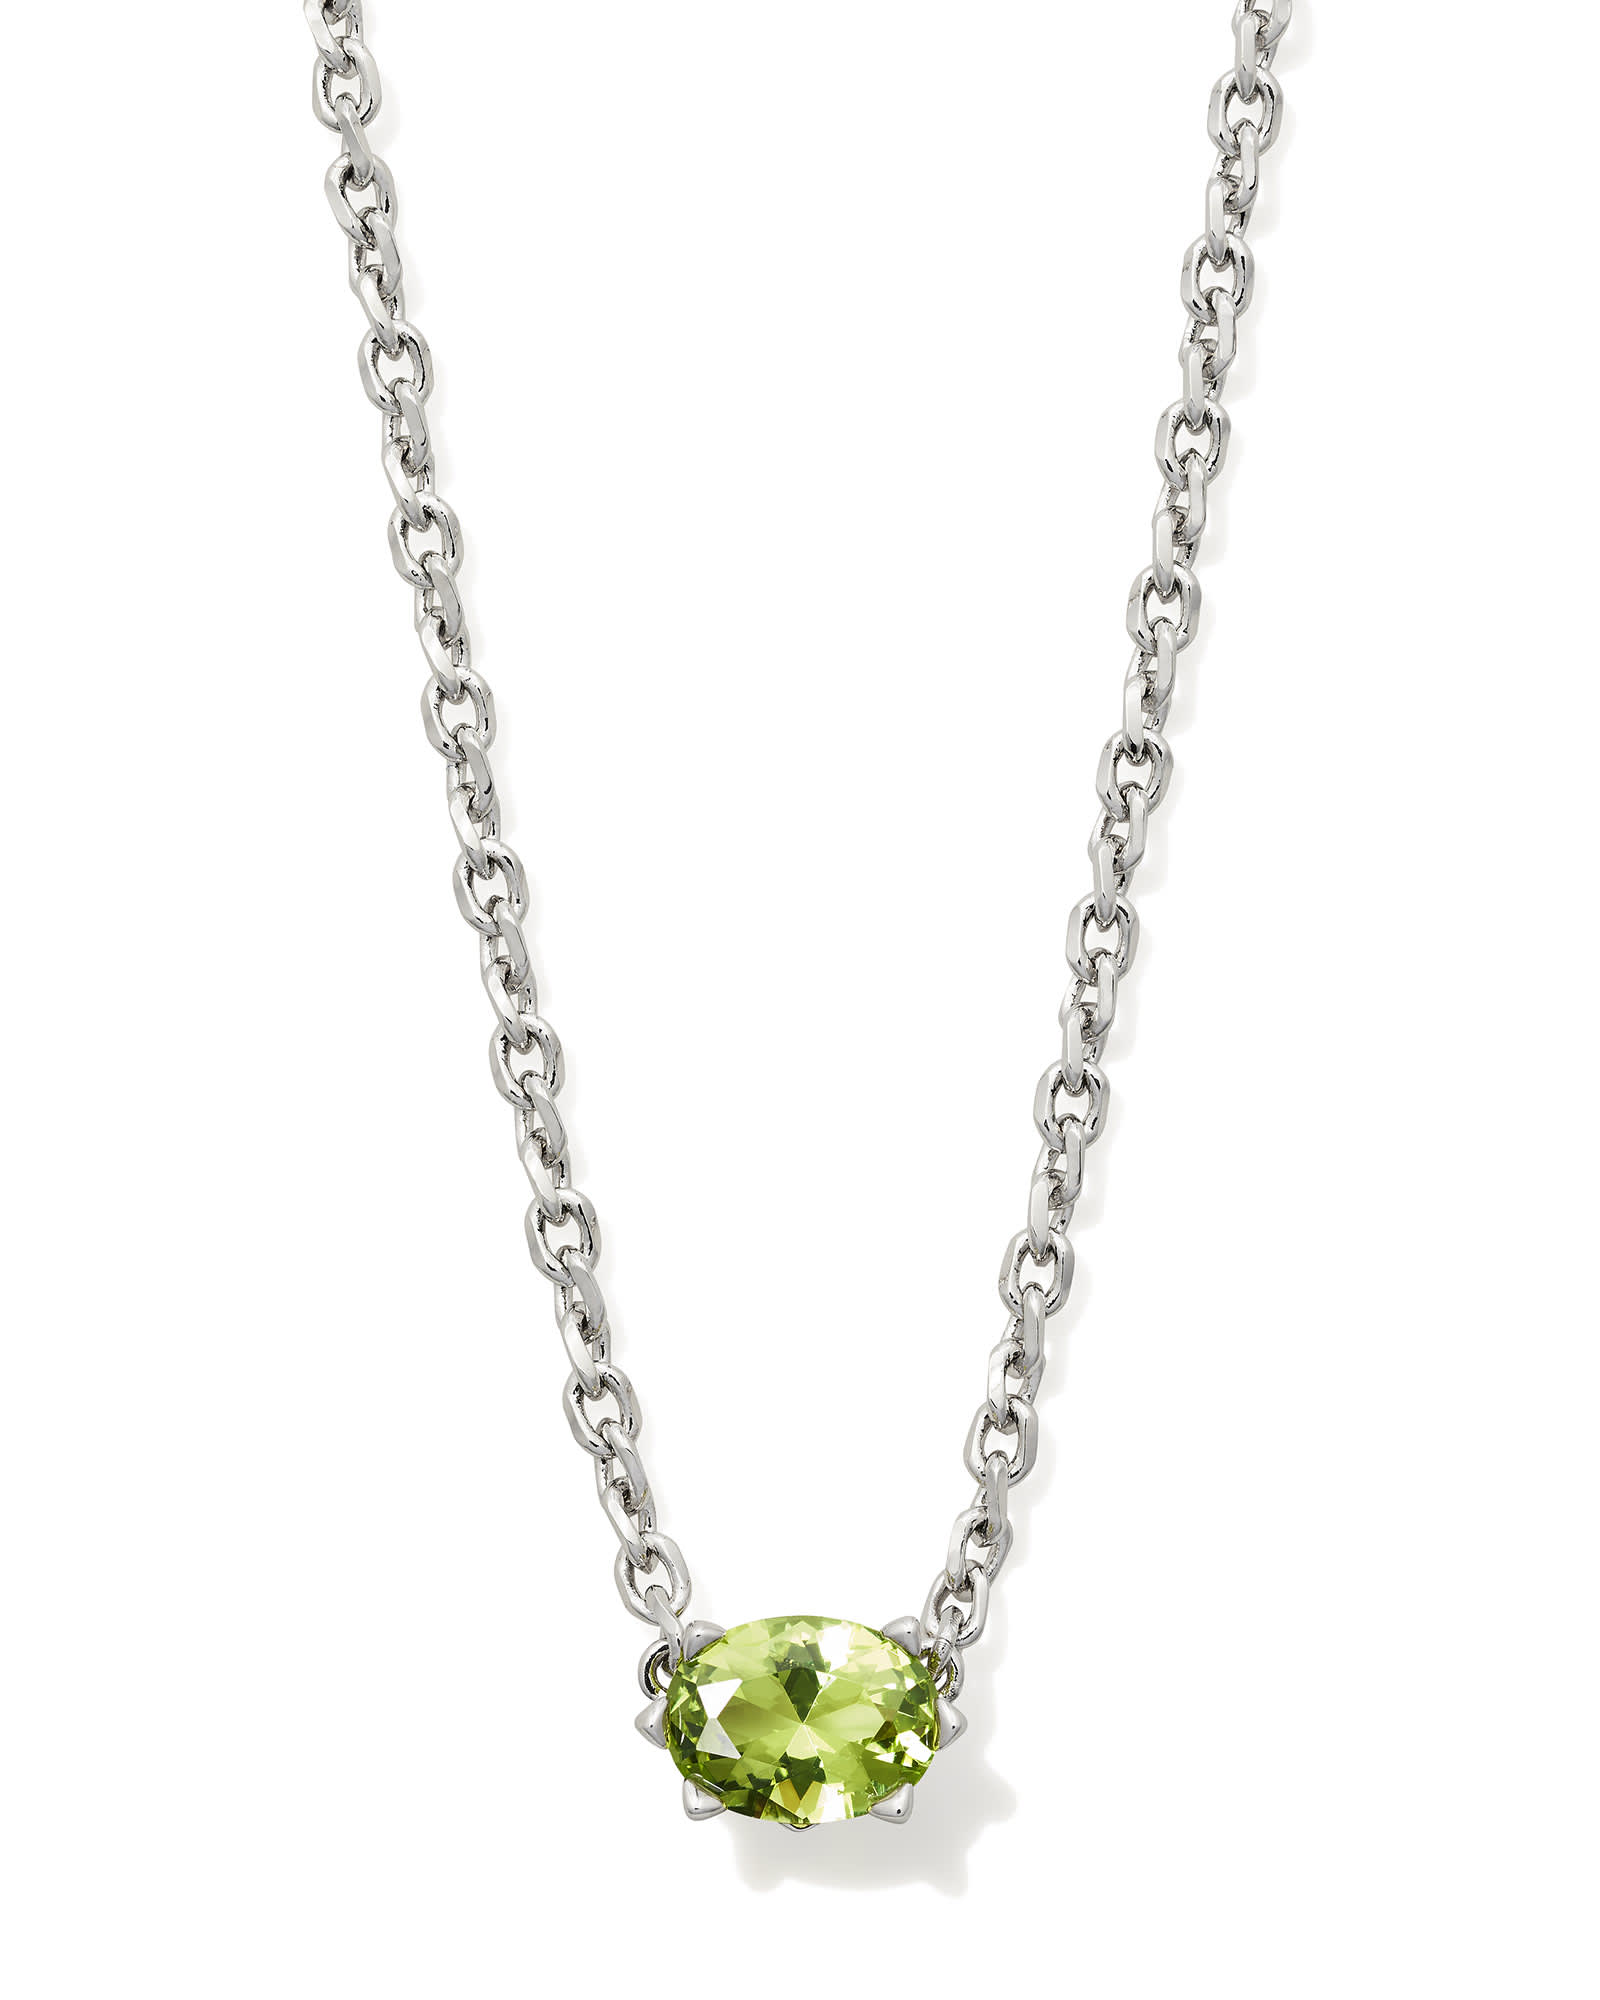 Cailin Silver Pendant Necklace in Green Peridot Crystal